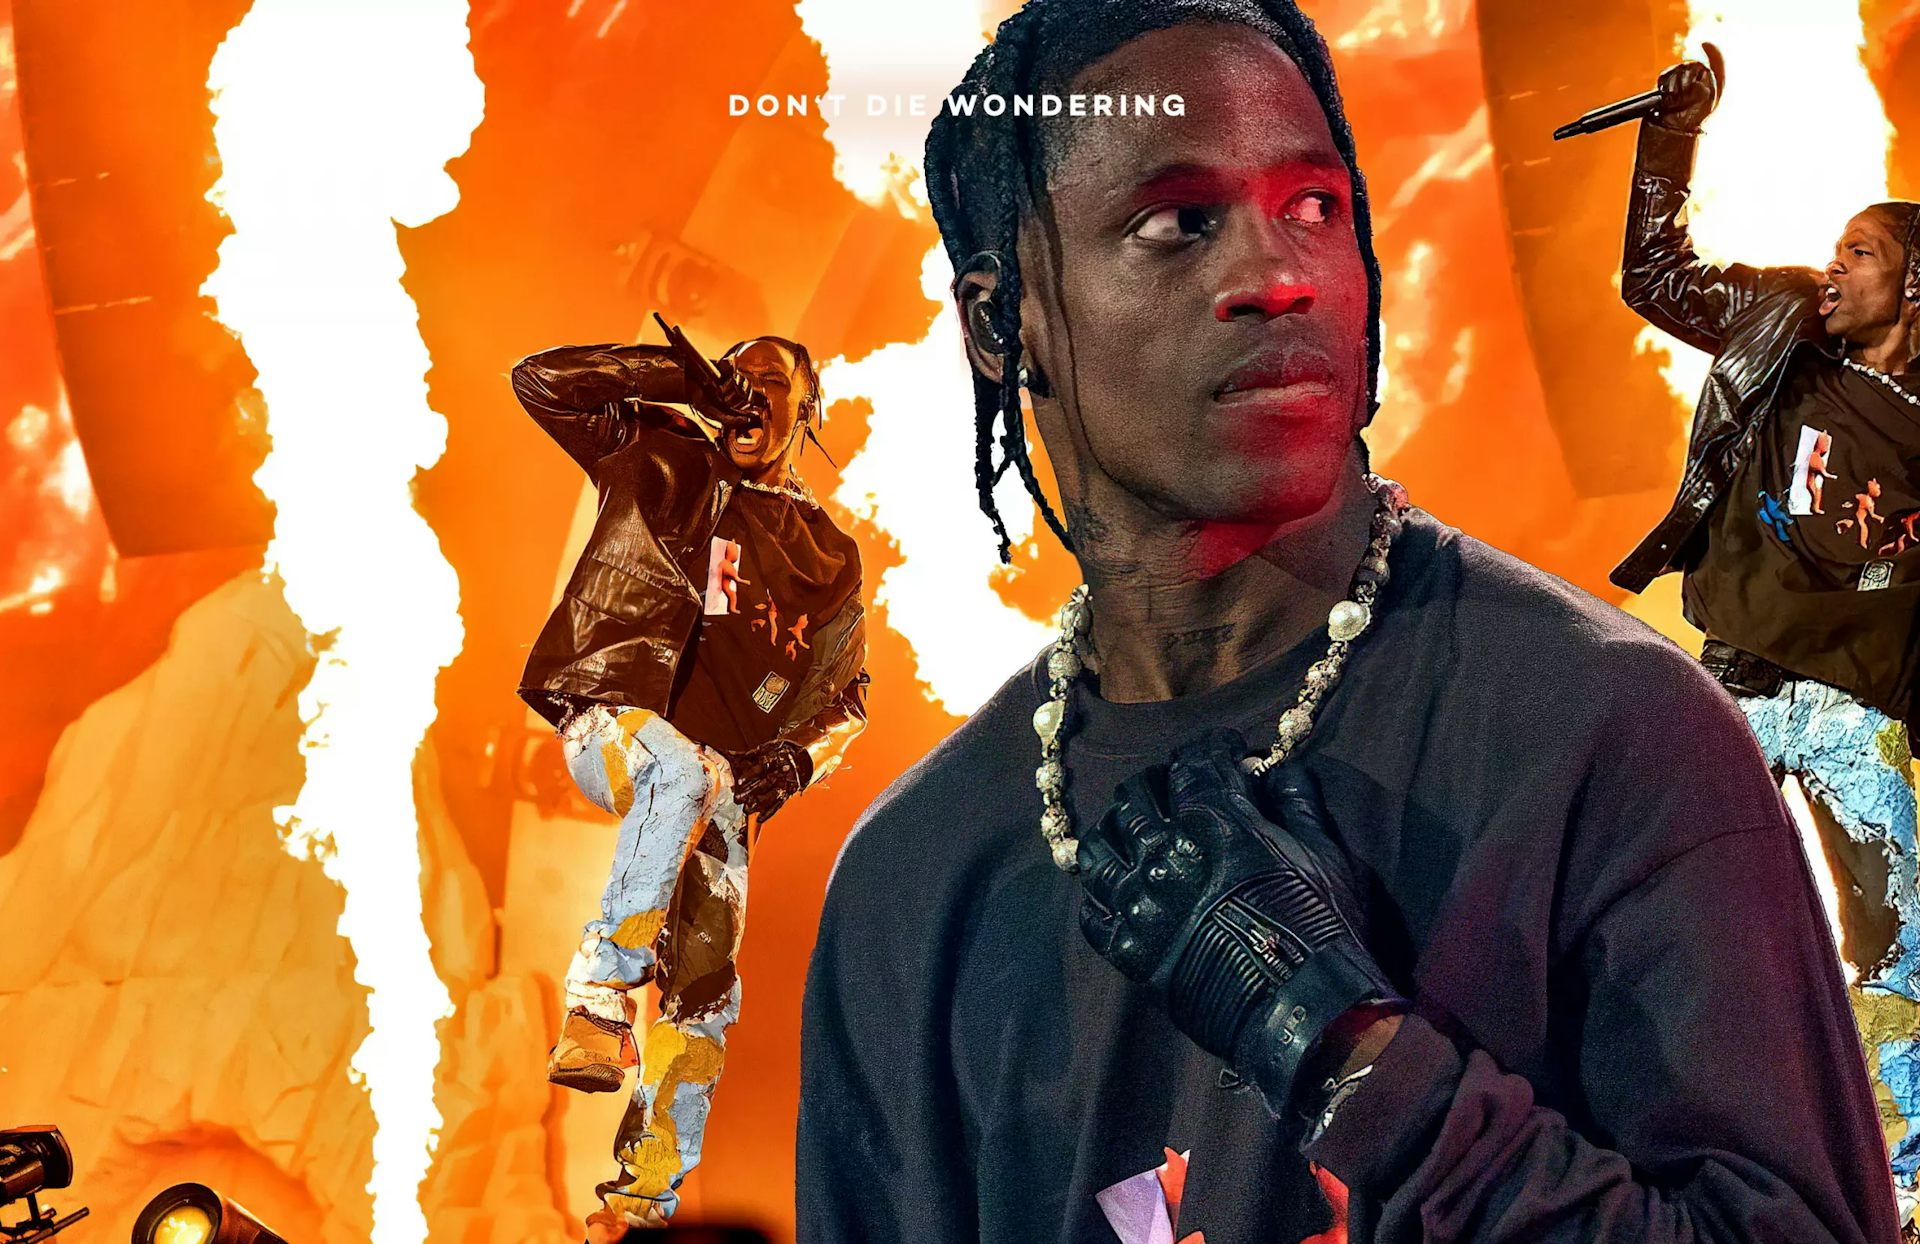 Has Travis Scott Been Cancelled After The Astroworld Disaster?